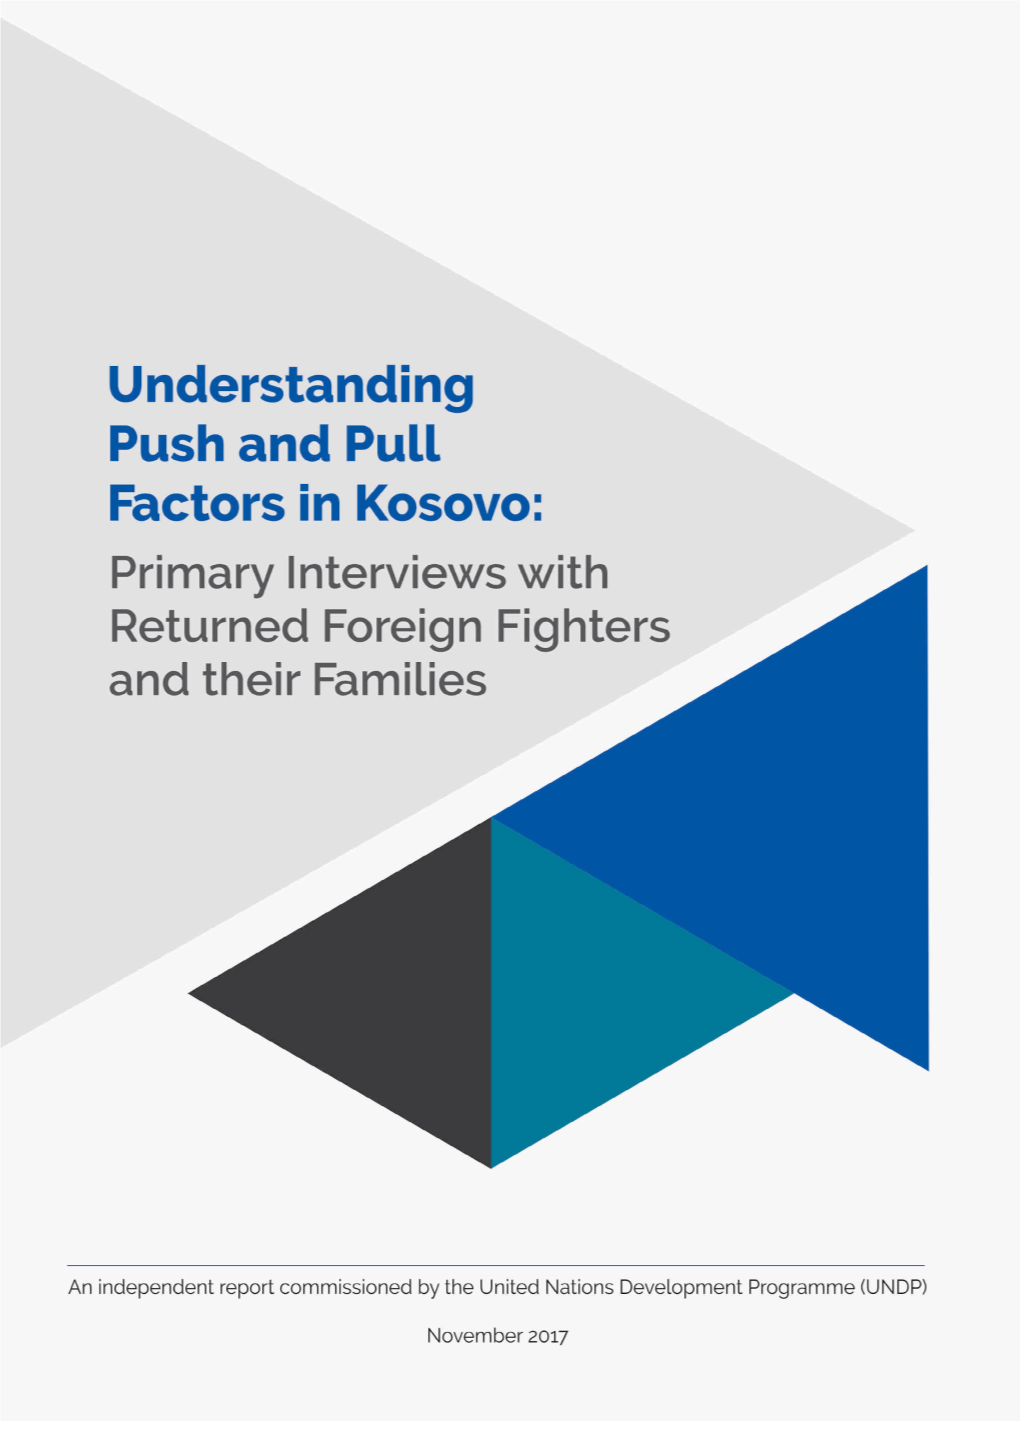 Pull Factors in Kosovo: Primary Interviews with Returned Foreign Fighters and Their Families